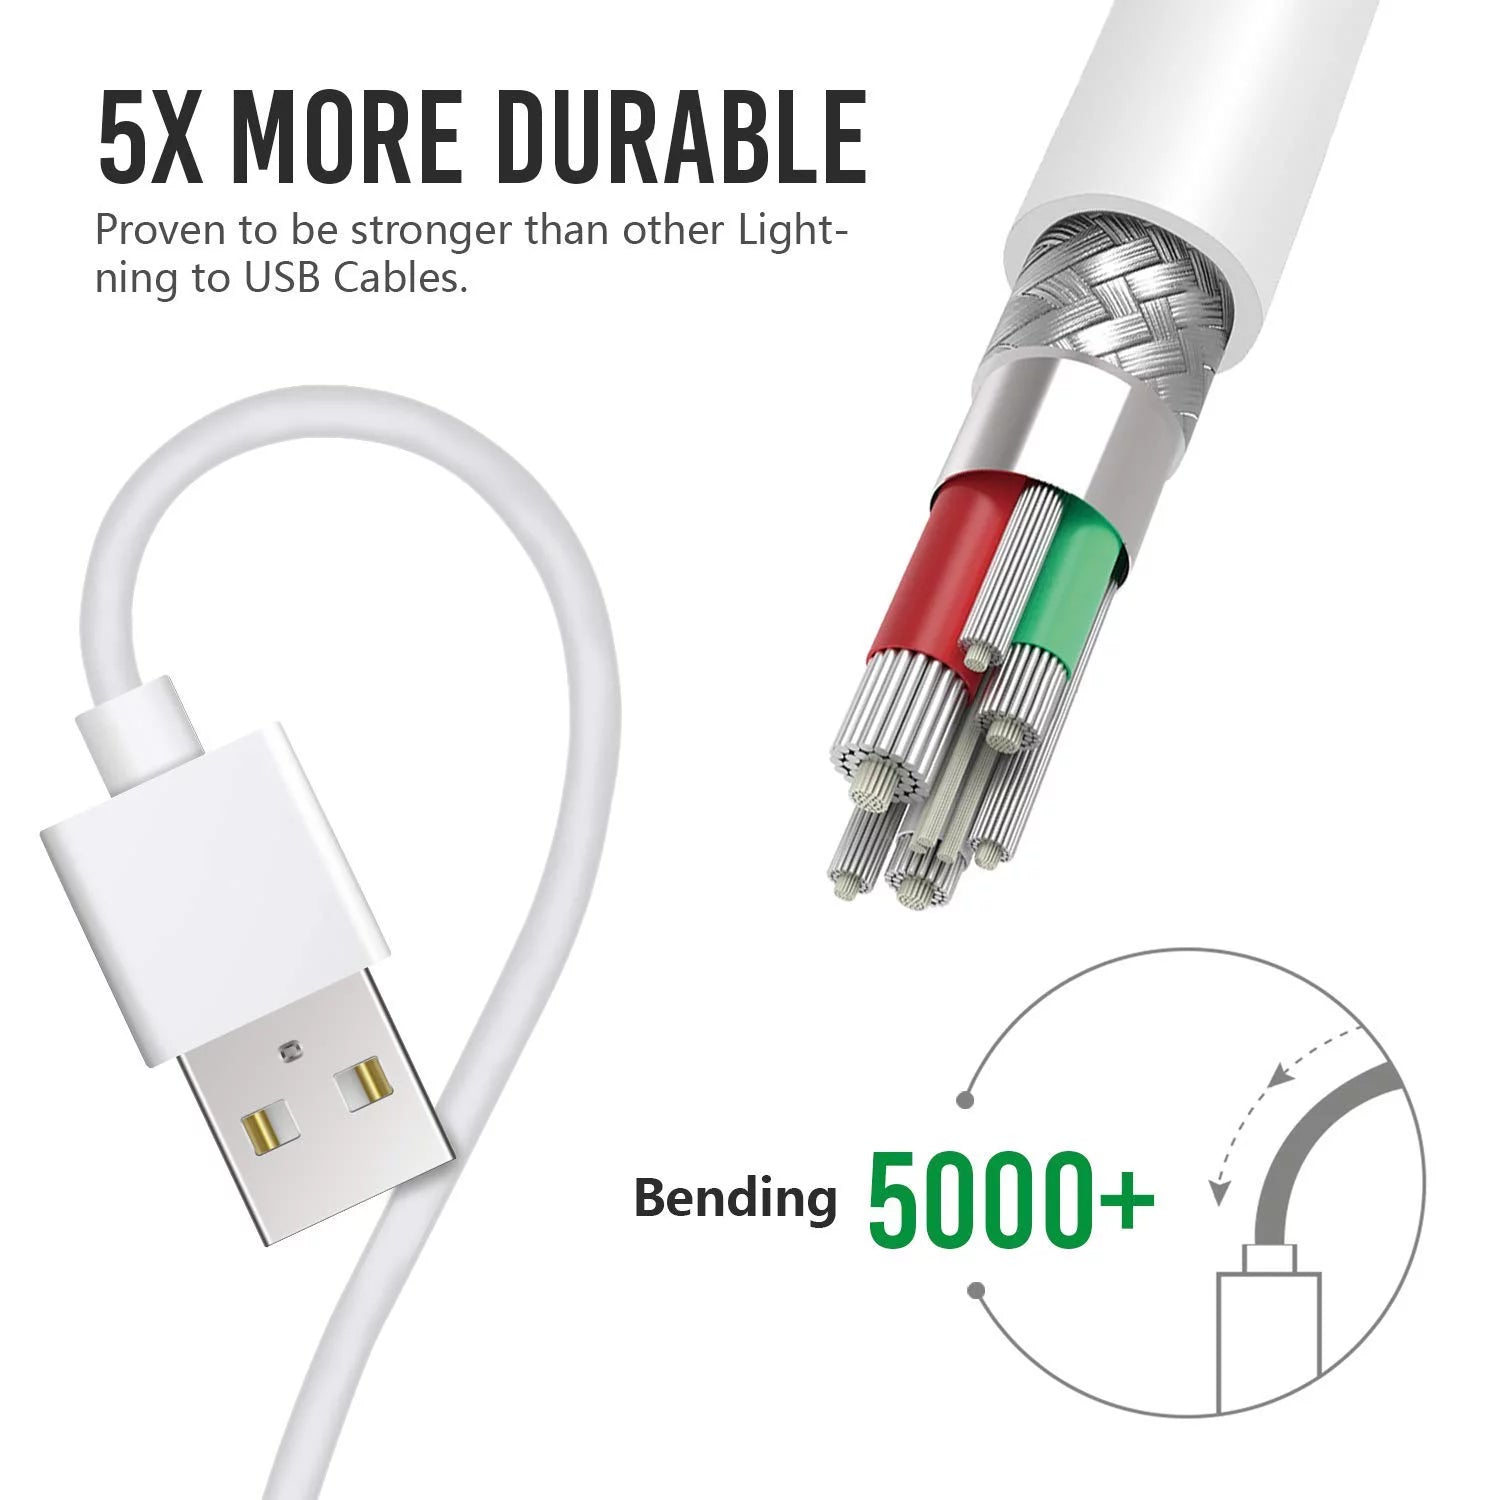 iPhone Charger Lightning Cable Set, Infinite Power, 2 Pack 3FT USB Cable, Compatible with Apple iPhone Xs,Xs Max,XR,X,8,8 Plus,7,7 Plus,6S,6S Plus,iPad Air,Mini/iPod Touch/Case,Charging & Syncing Cord